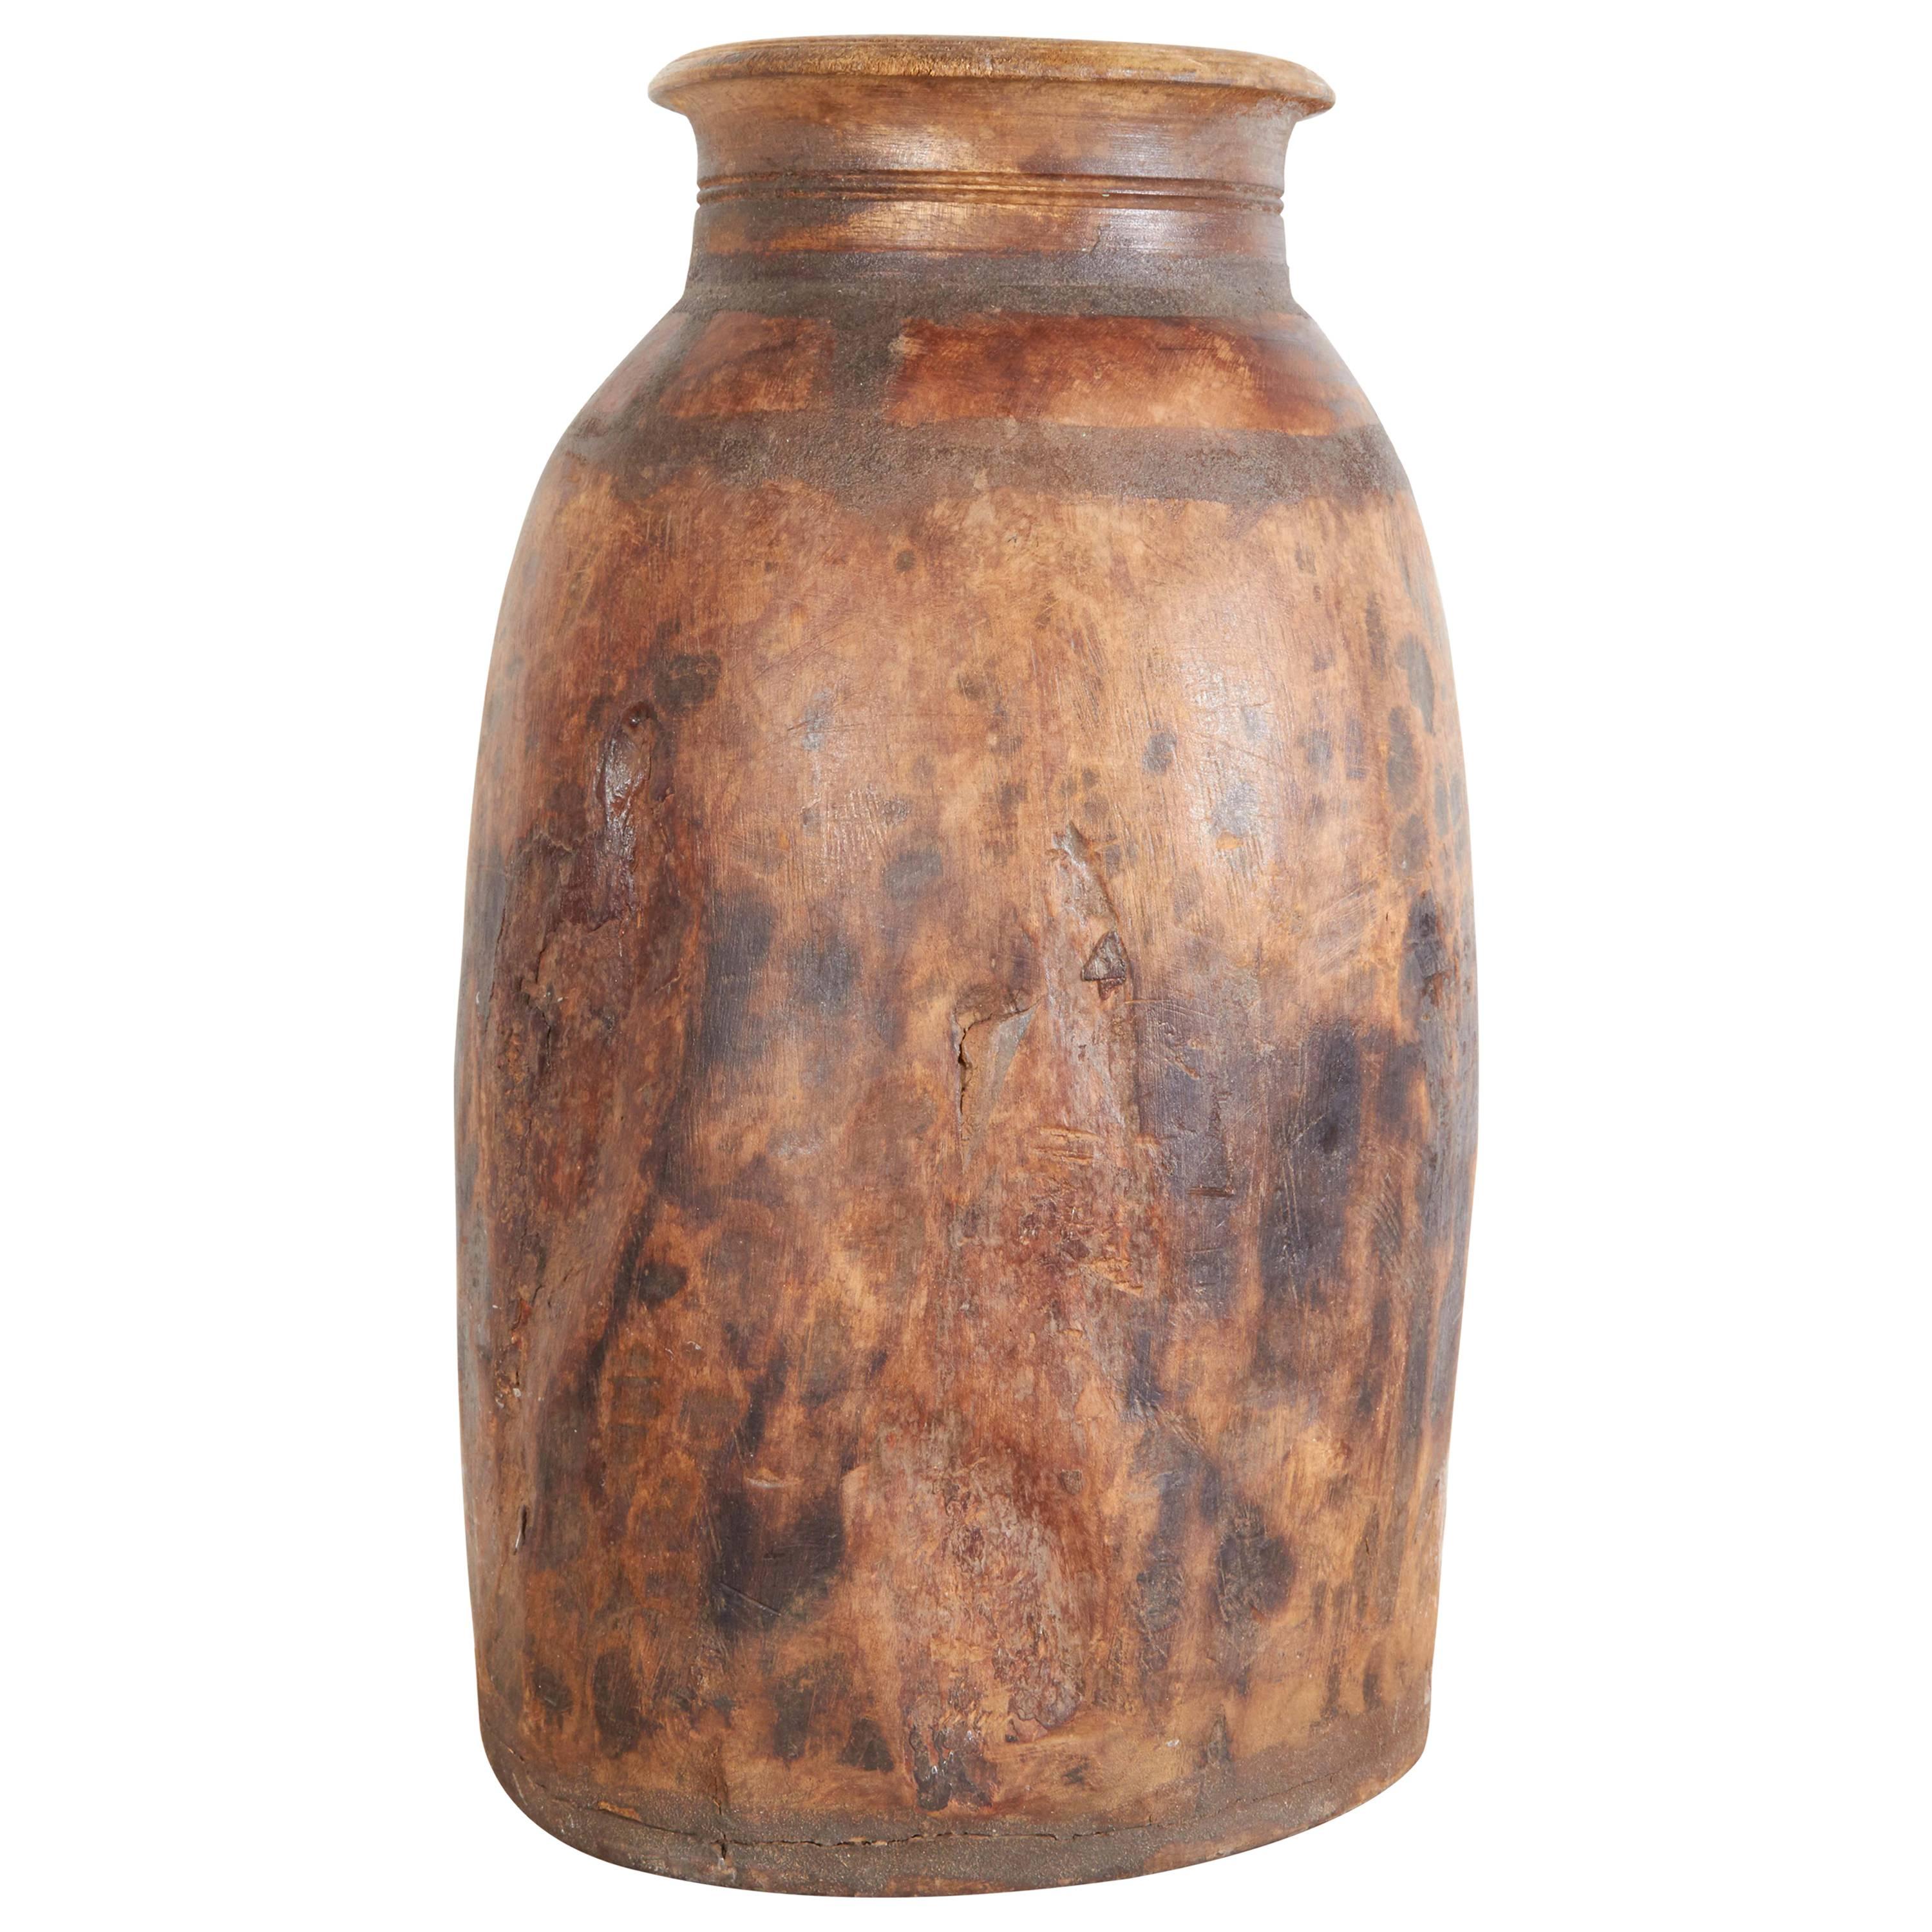 Perfectly Worn Primitive Grain Container